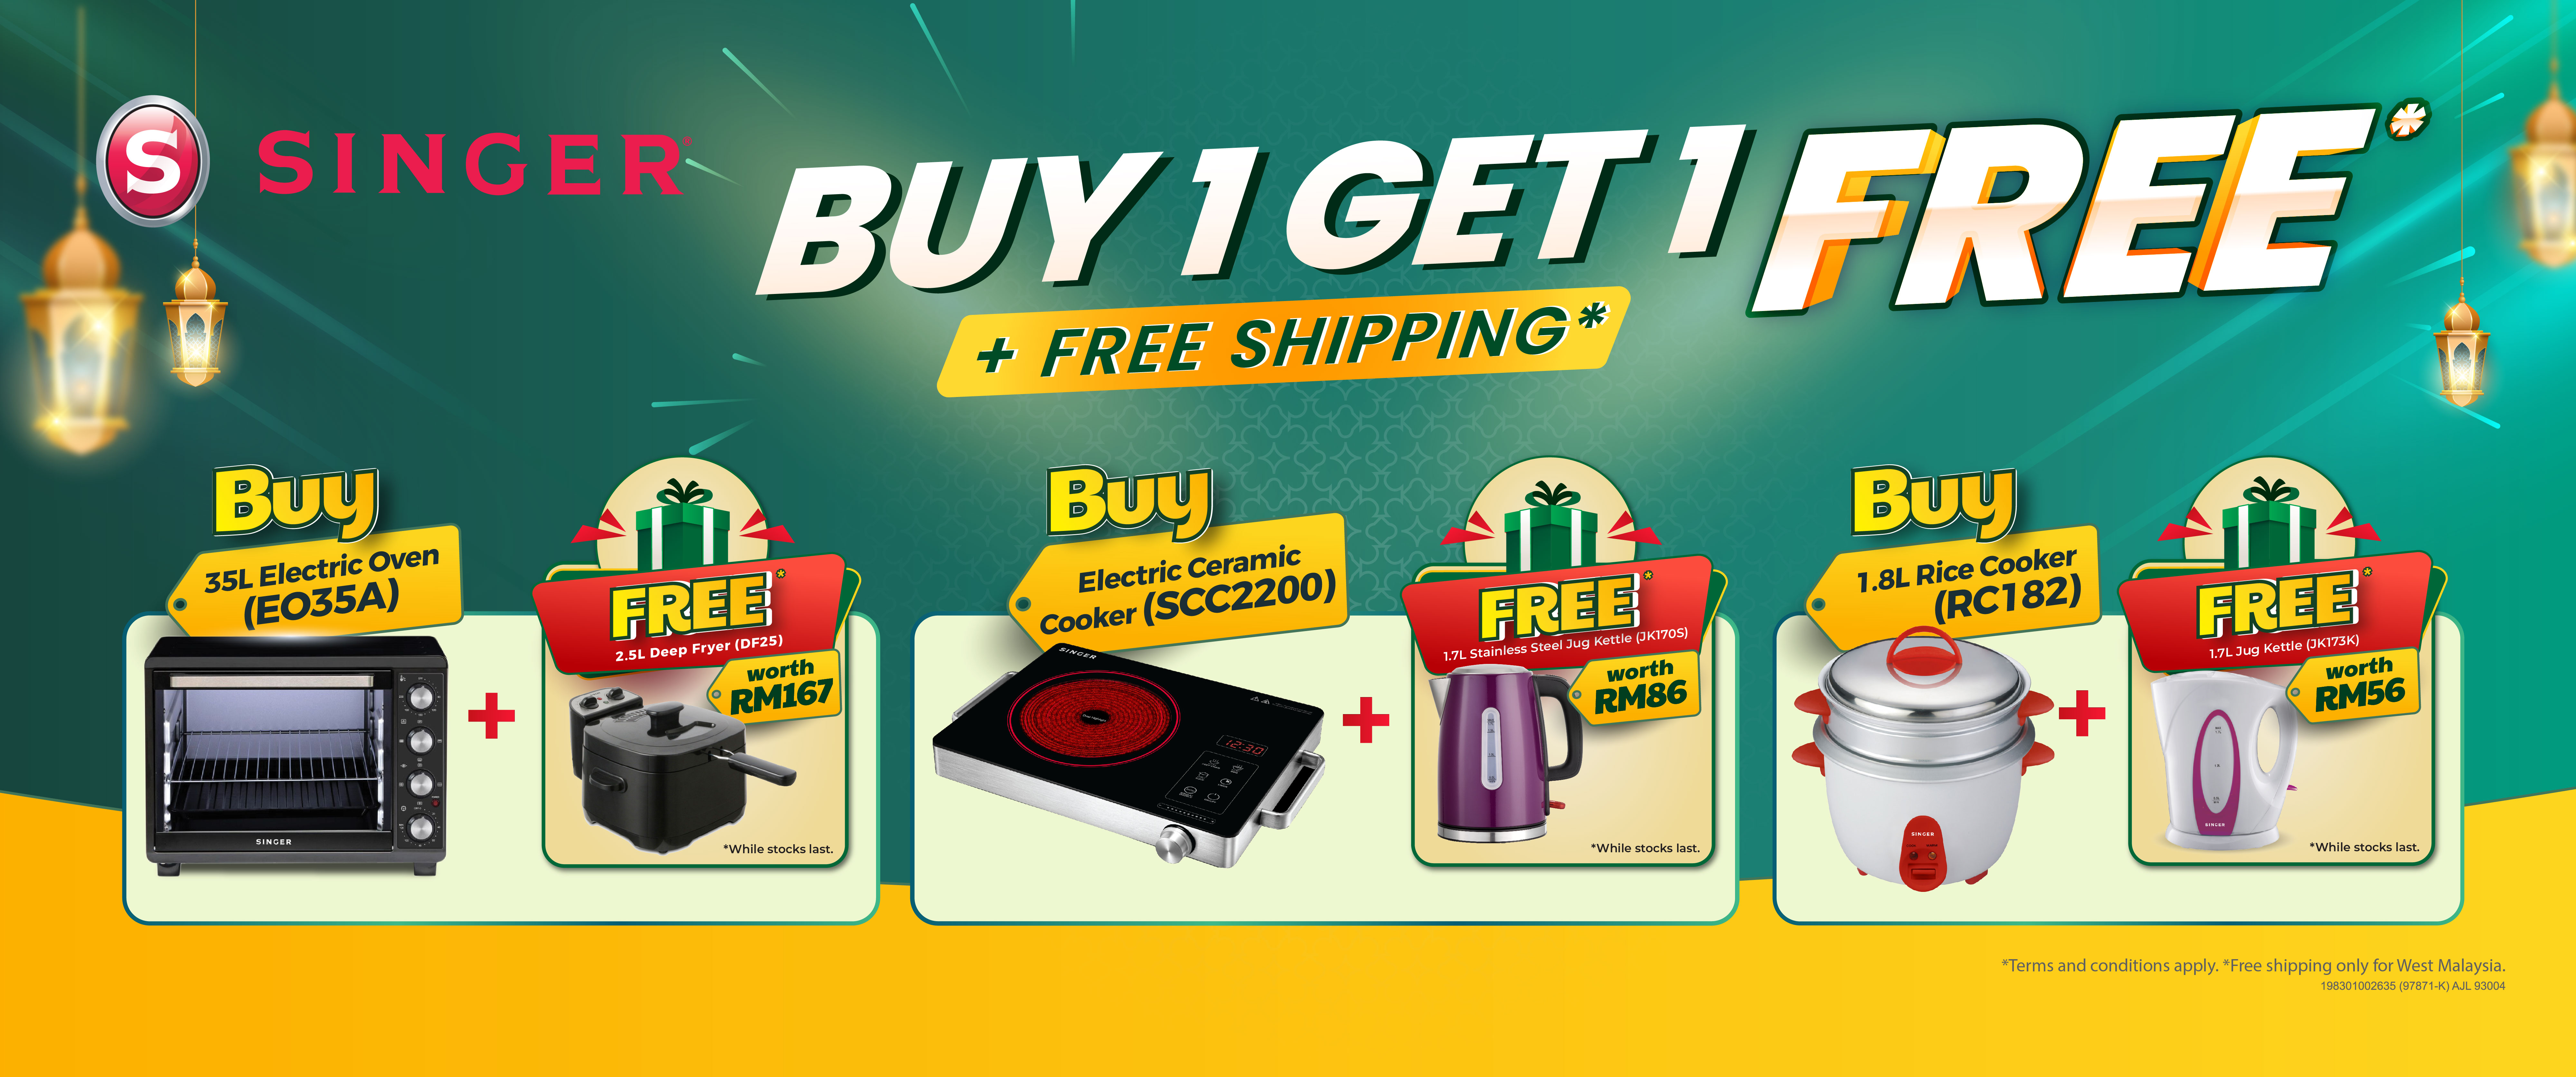 Buy 1 Get 1 Free Promotion